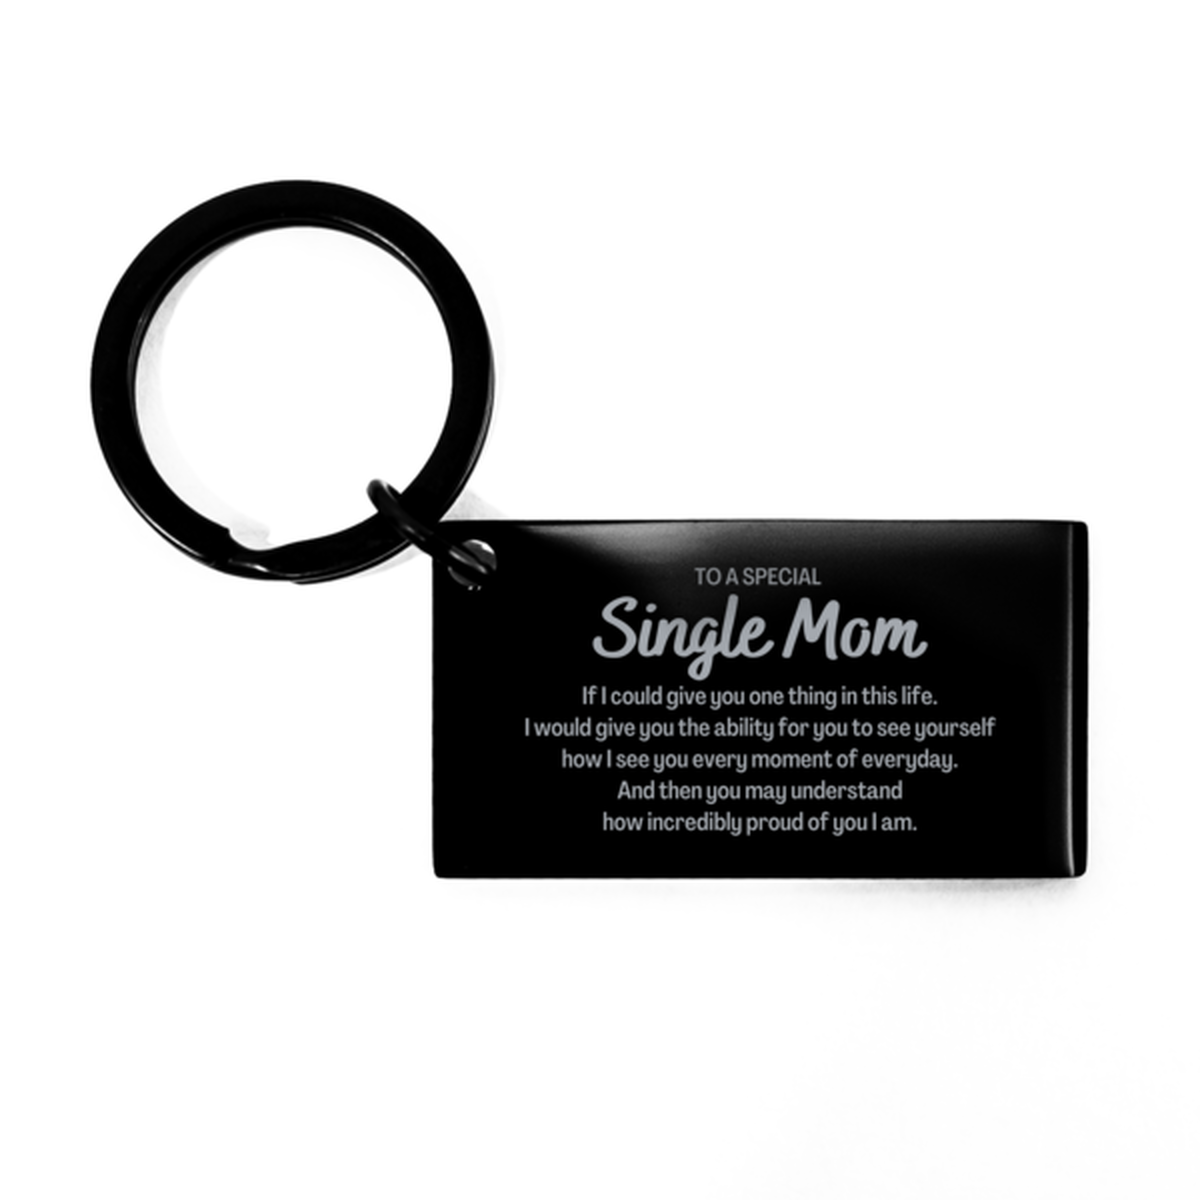 To My Single Mom Keychain, Gifts For Single Mom Engraved, Inspirational Gifts for Christmas Birthday, Epic Gifts for Single Mom To A Special Single Mom how incredibly proud of you I am